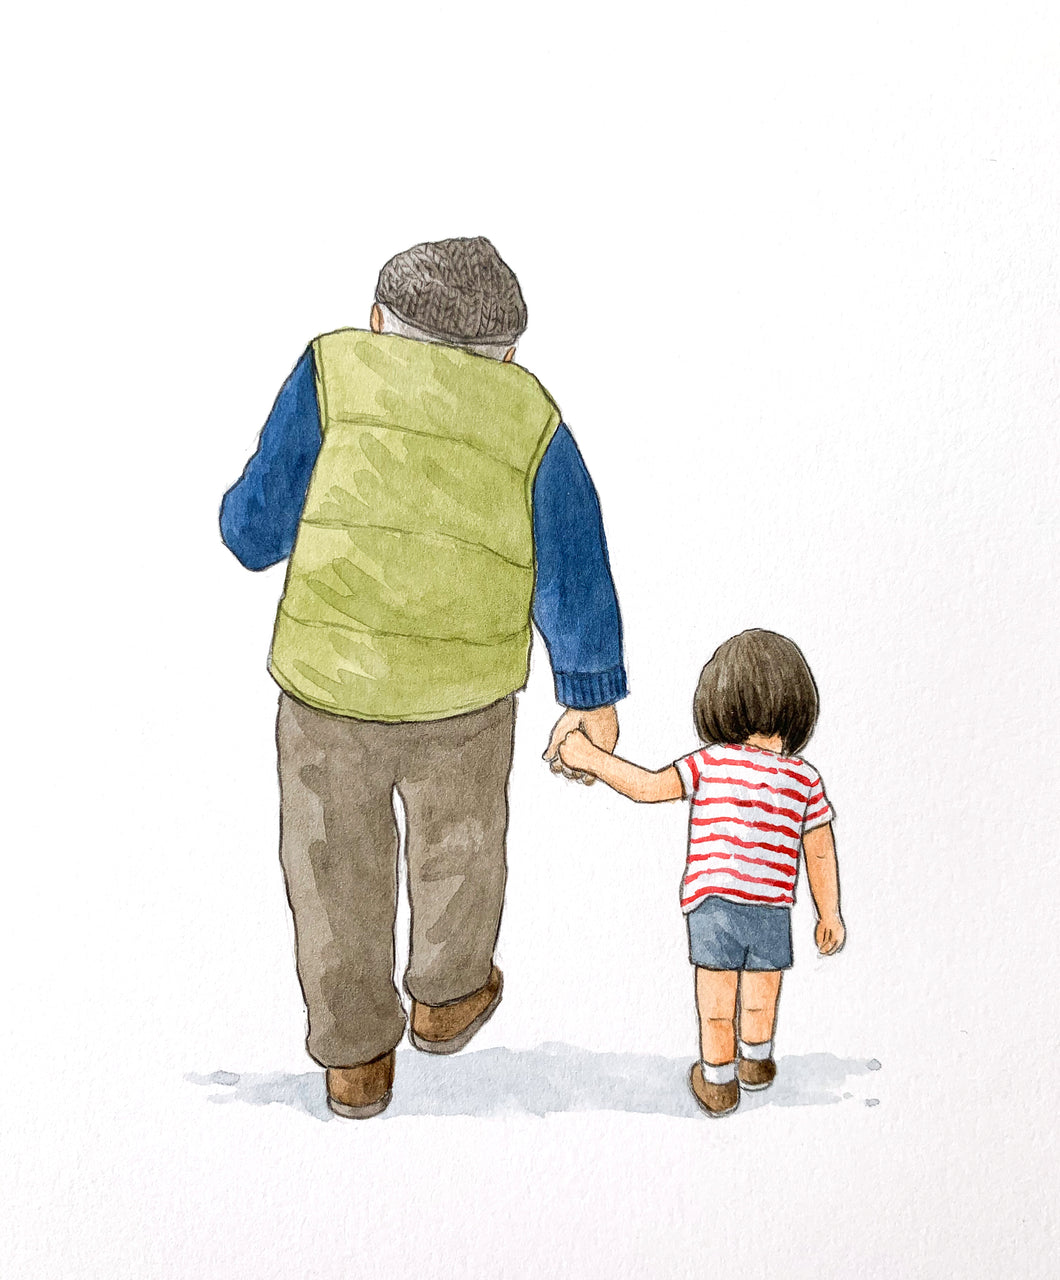 With Grandpa - Original signed painting in watercolour and pencil crayon.